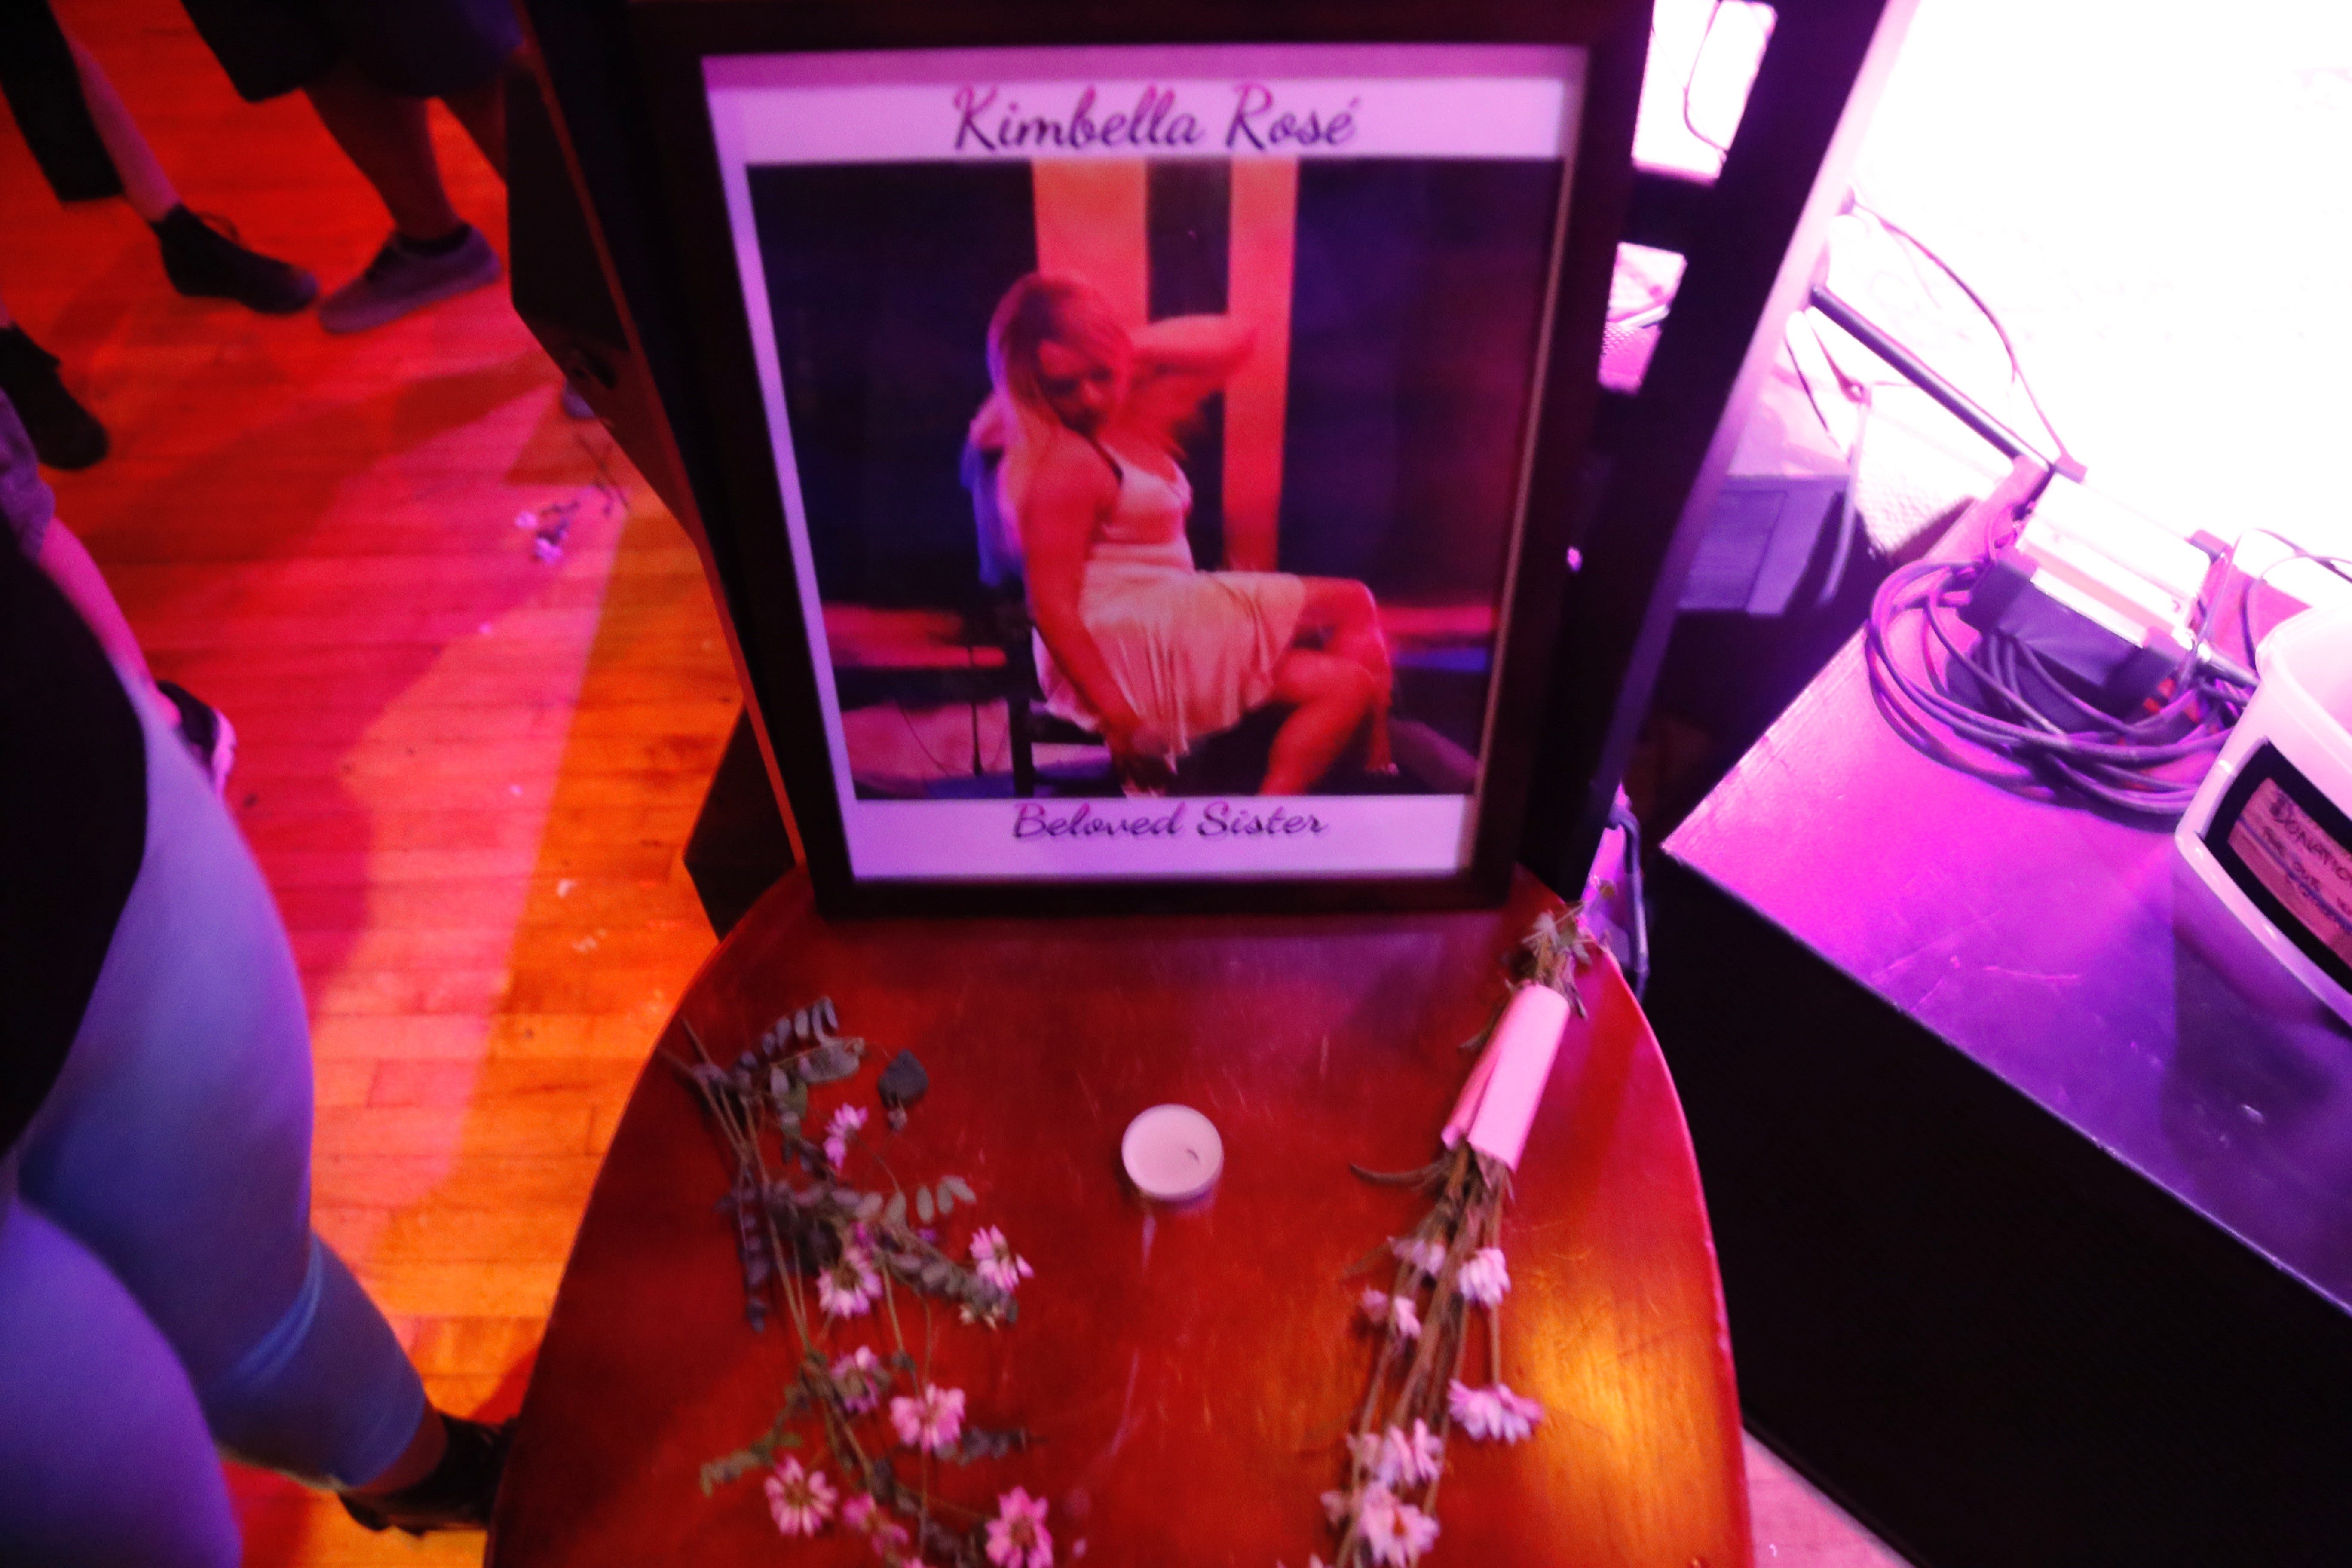 A photo of Josie Berrios, whose stage name was Kimbella Rosé, was placed in front of the stage during a drag show held in Josie’s memory June 22, 2017.